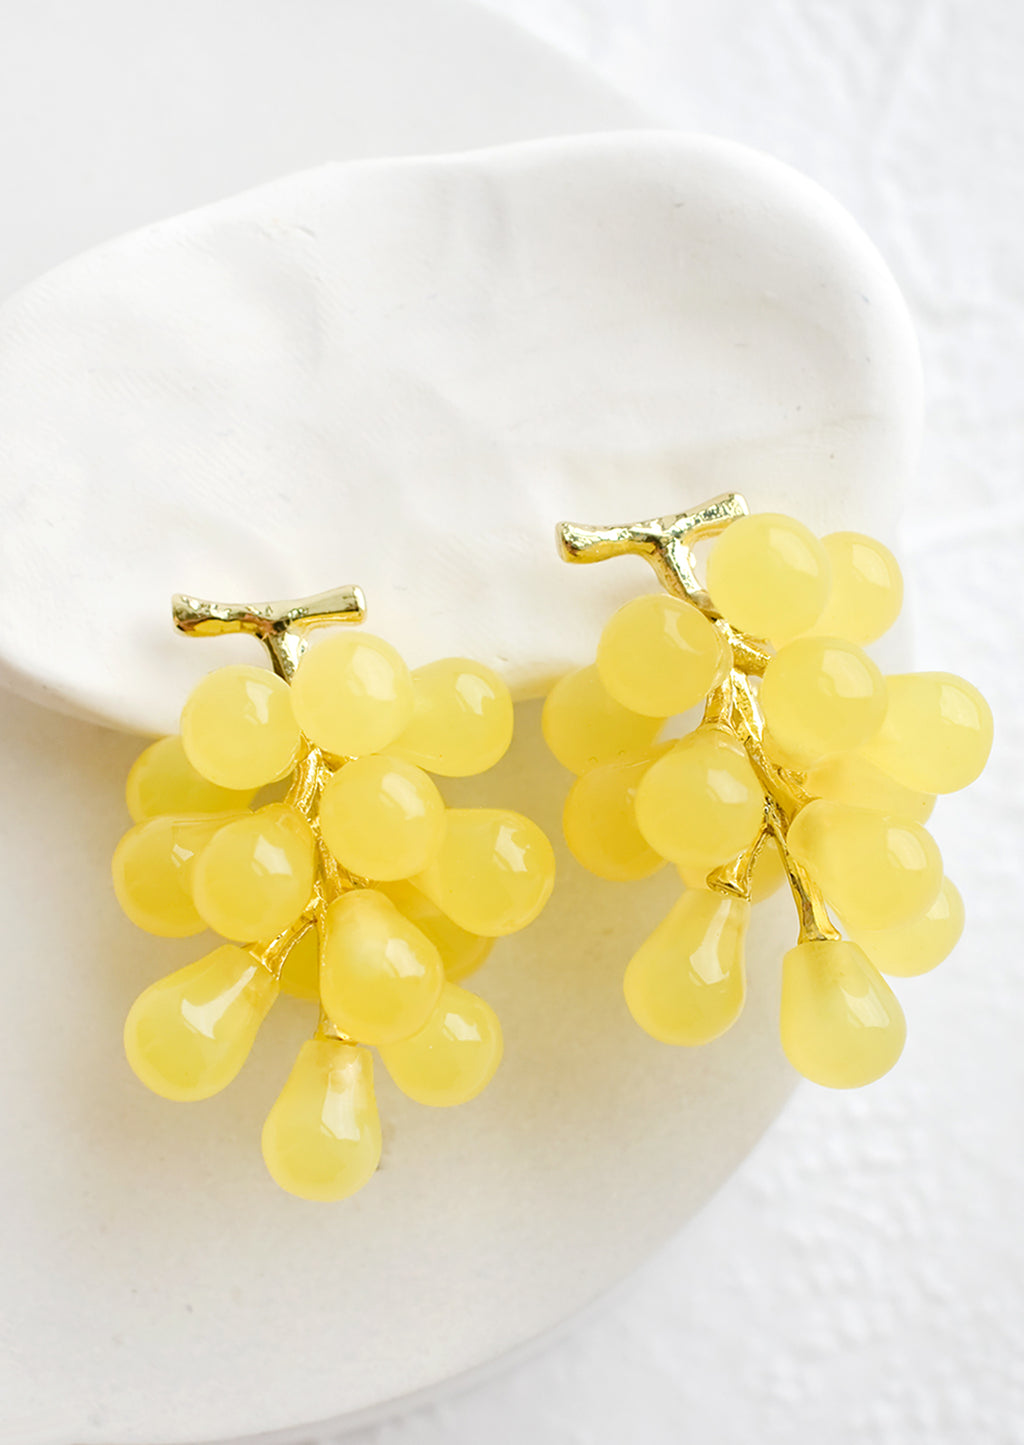 Yellow Grape: A pair of earrings in the shape of green grape bunches.